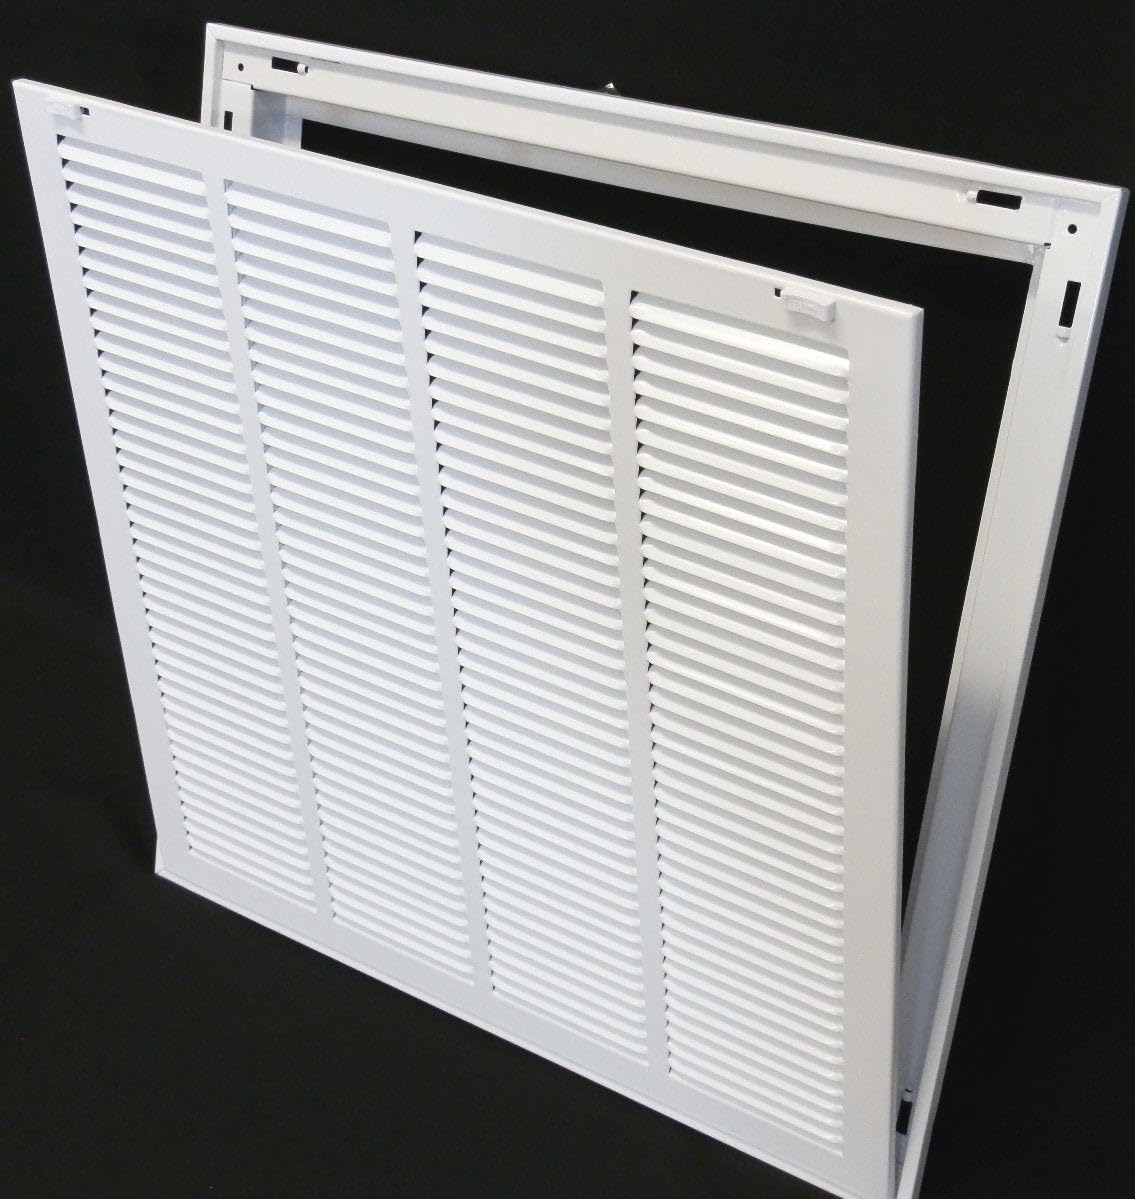 28&quot; X 14&quot; Steel Return Air Filter Grille for 1&quot; Filter - Removable Frame - [Outer Dimensions: 30 5/8&quot; X 16 5/8&quot;]